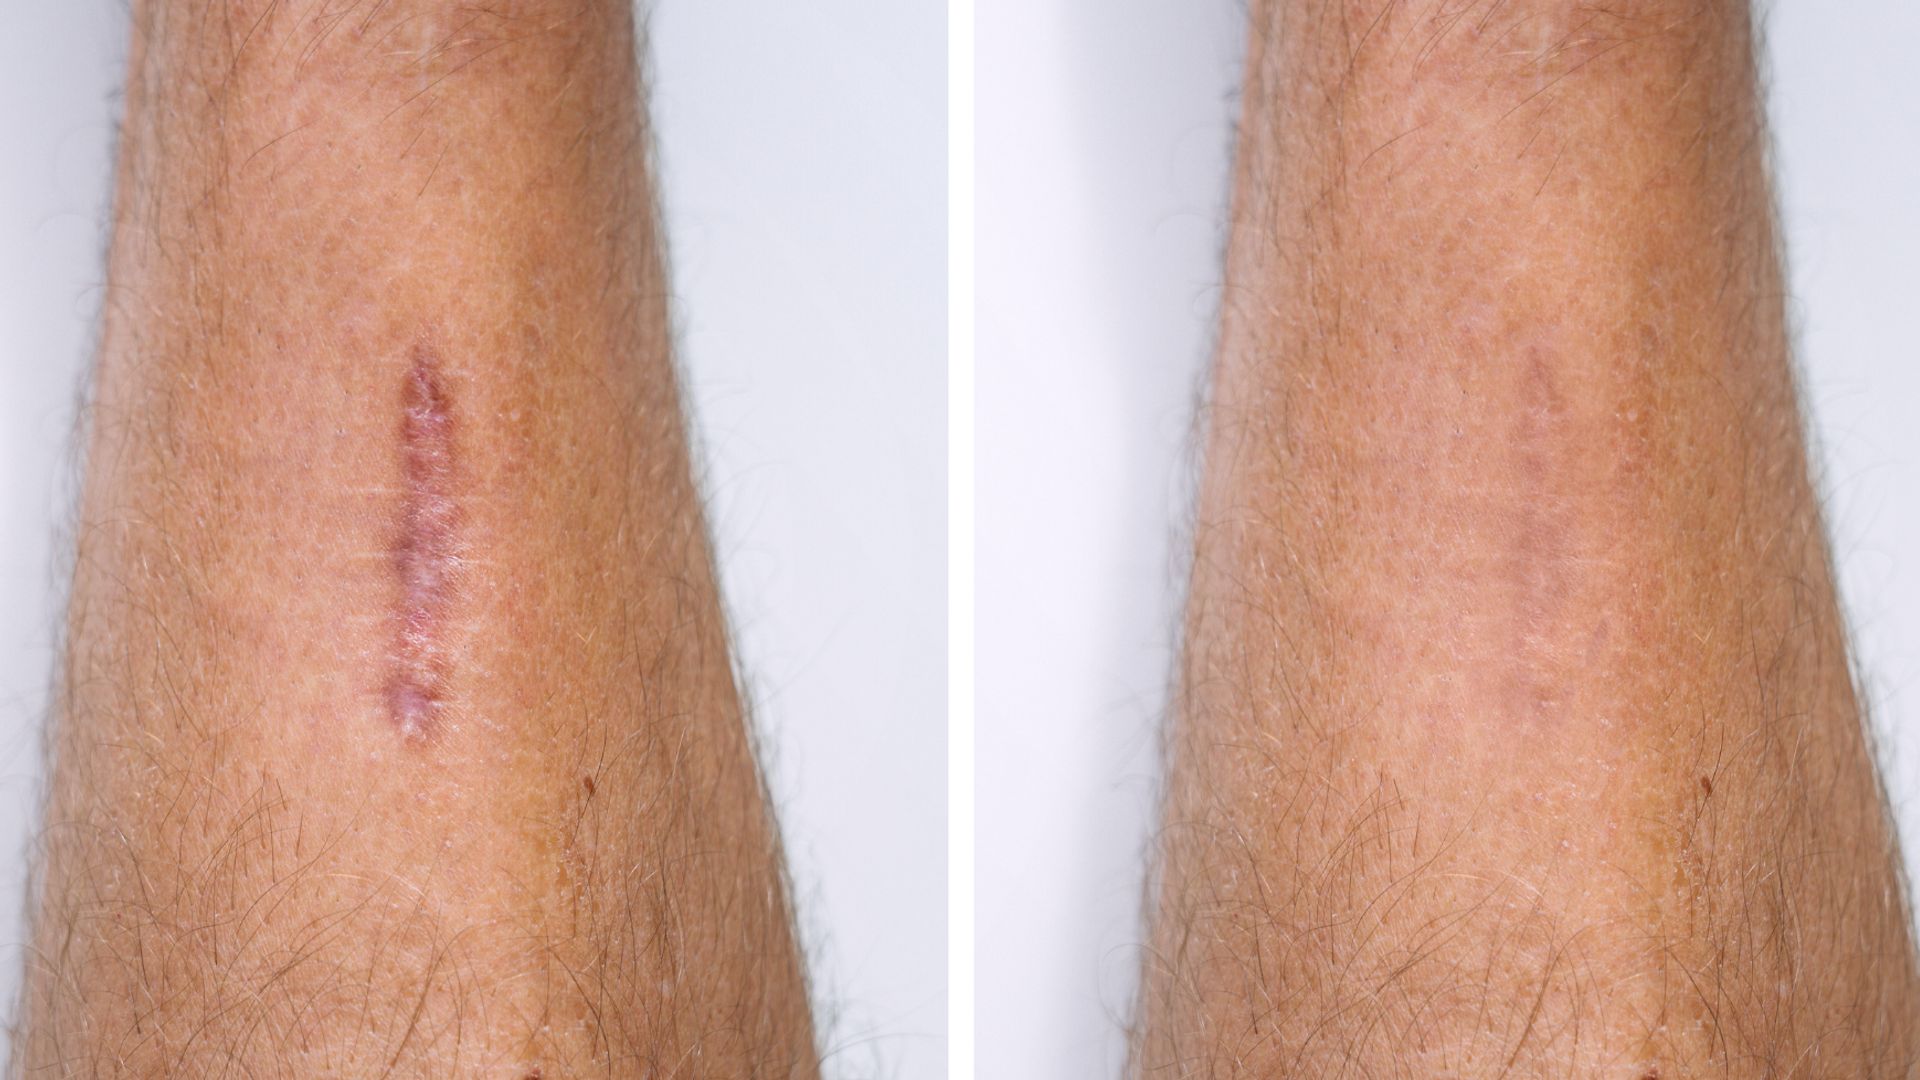 Leg with scar side by side, right side shows healed scar